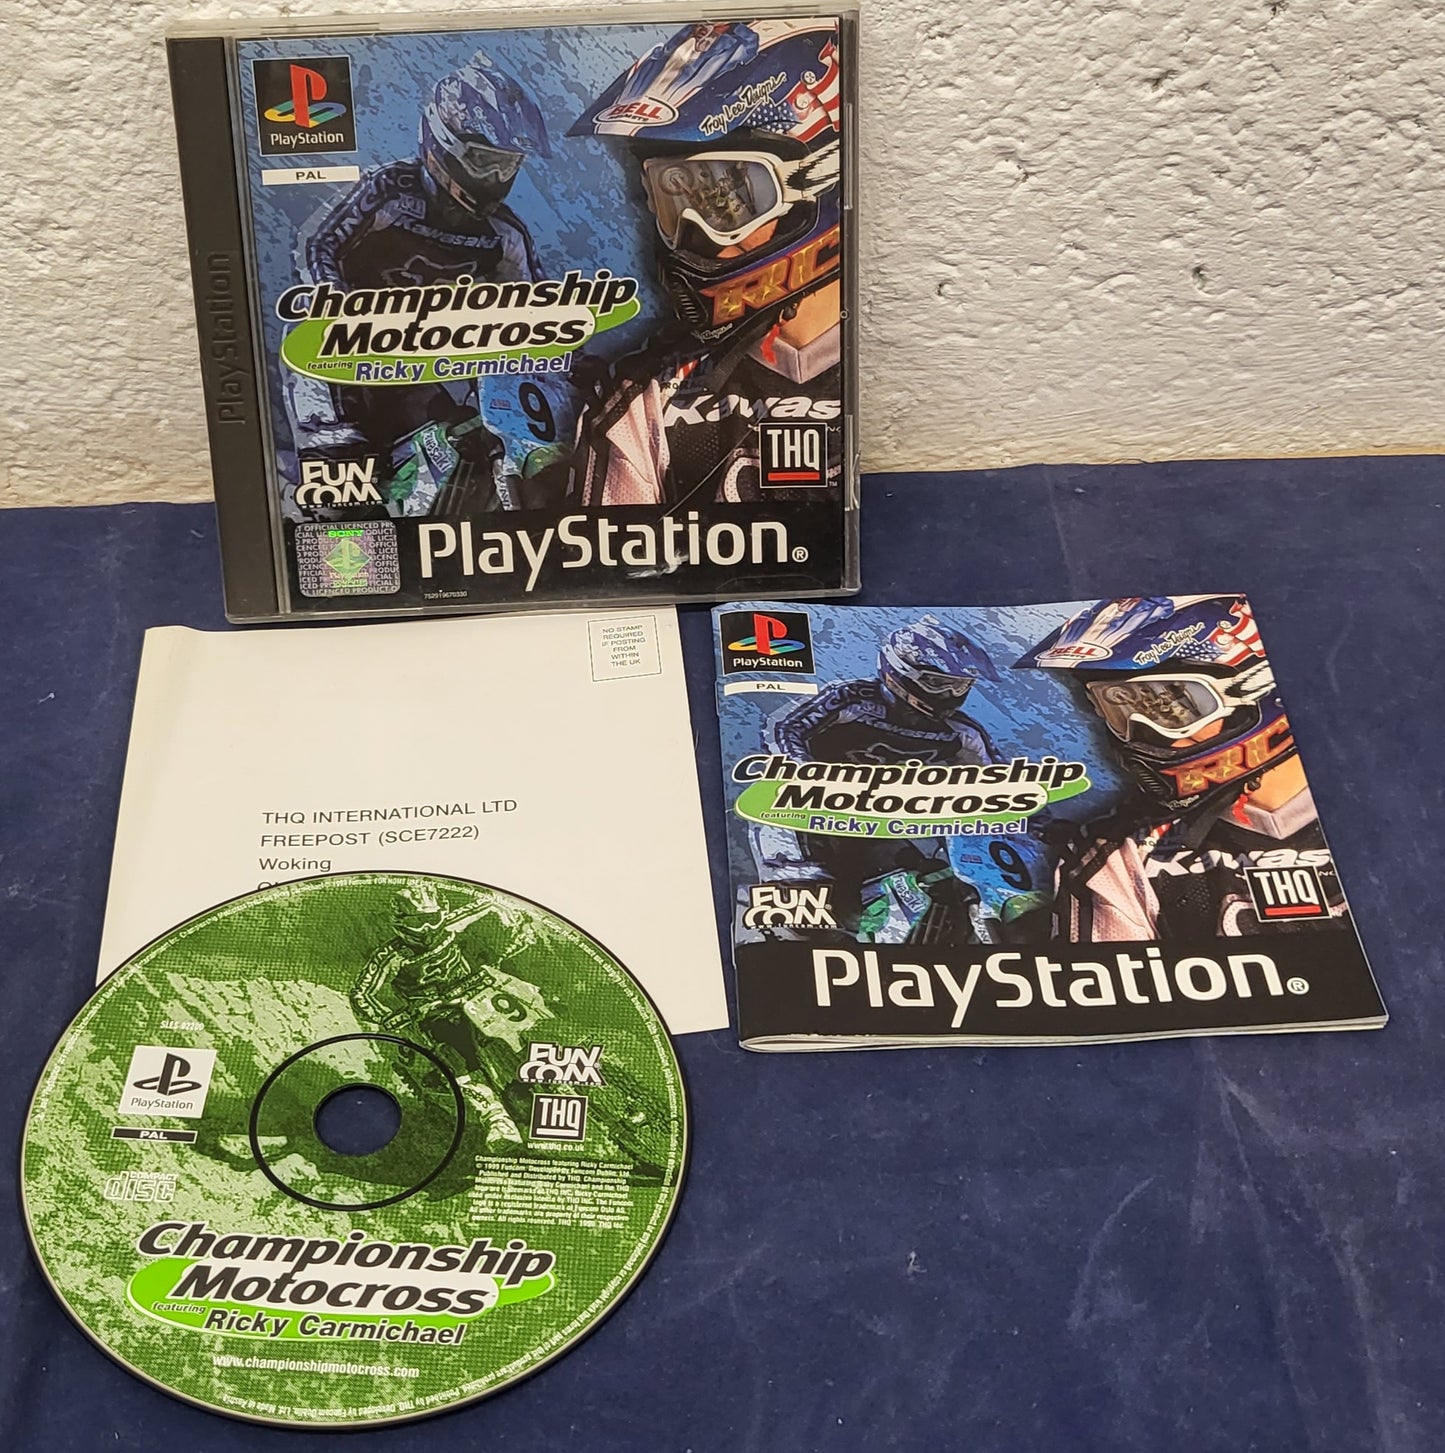 Championship Motocross Featuring Ricky Carmichael Sony Playstation 1 (PS1) Game